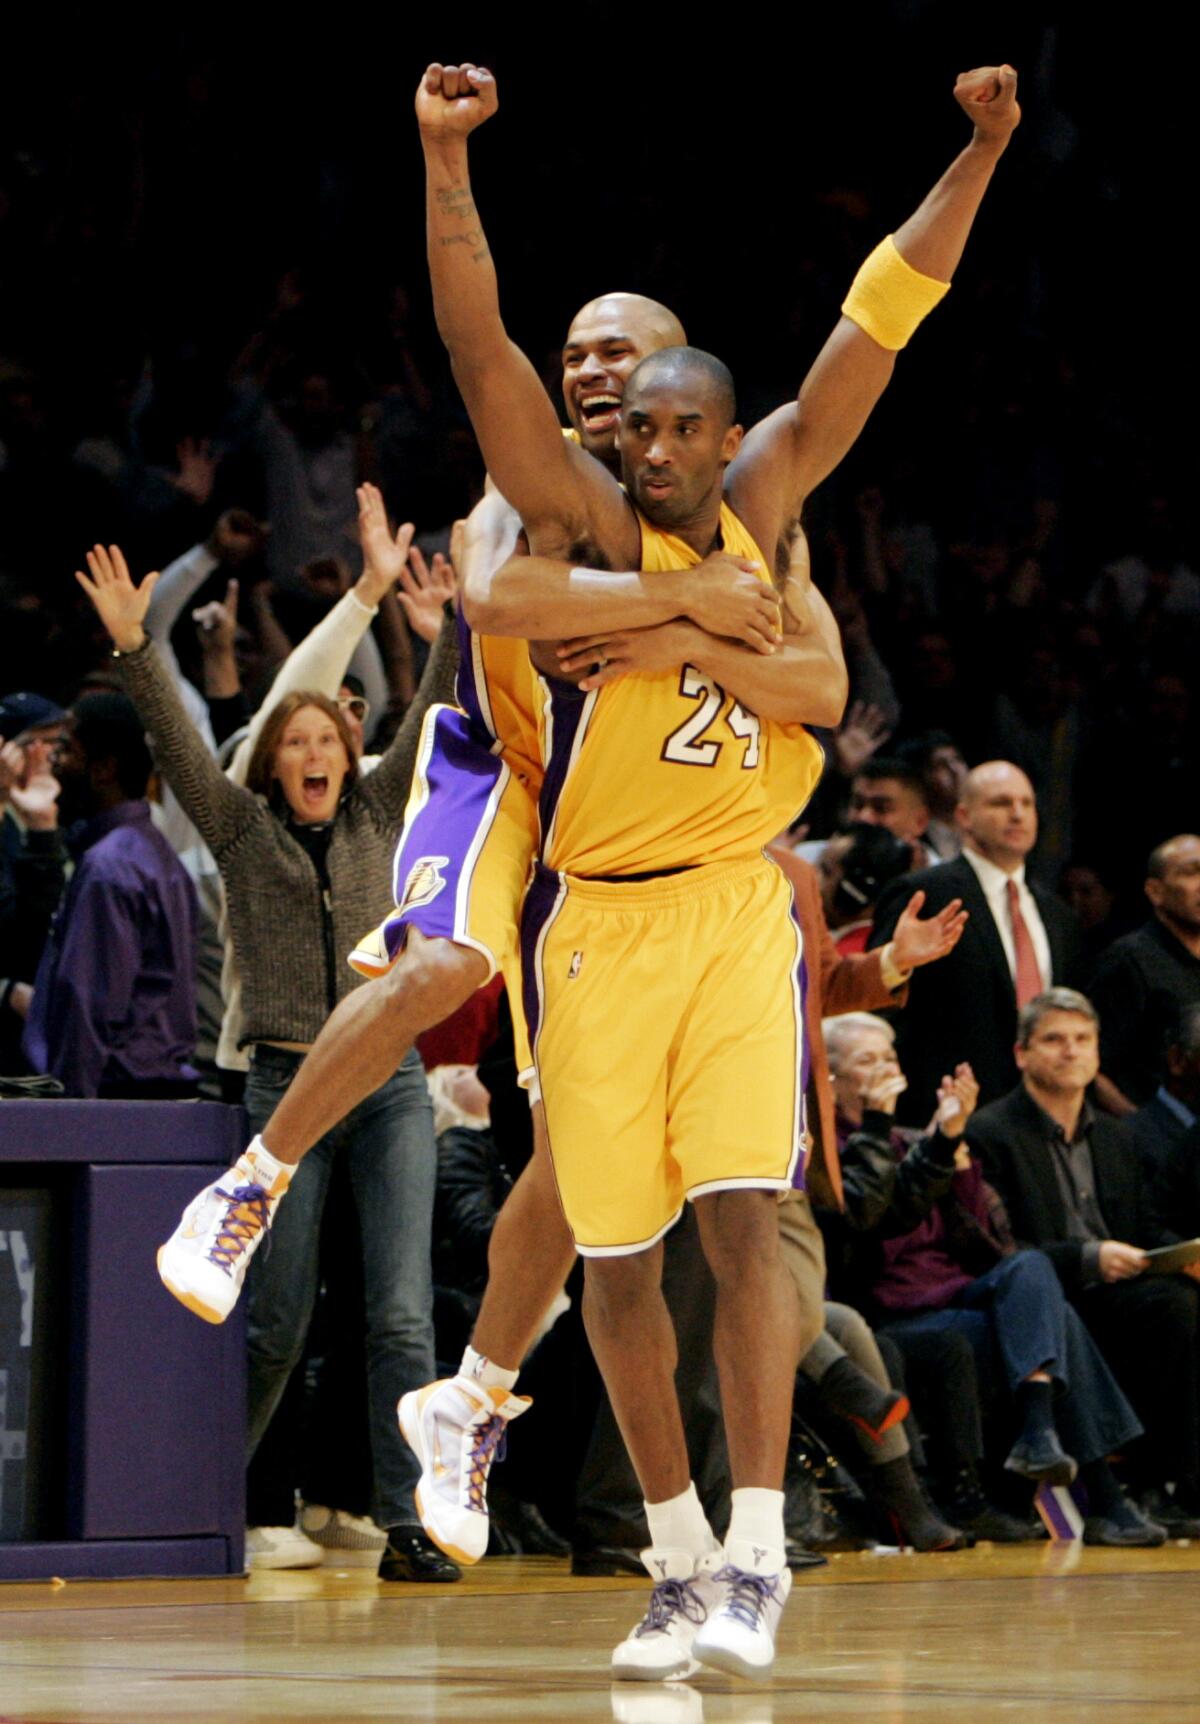 Derek Fisher leaps onto the back of teammate Kobe Bryant after he made a game-winning, last-second shot against the Heat.